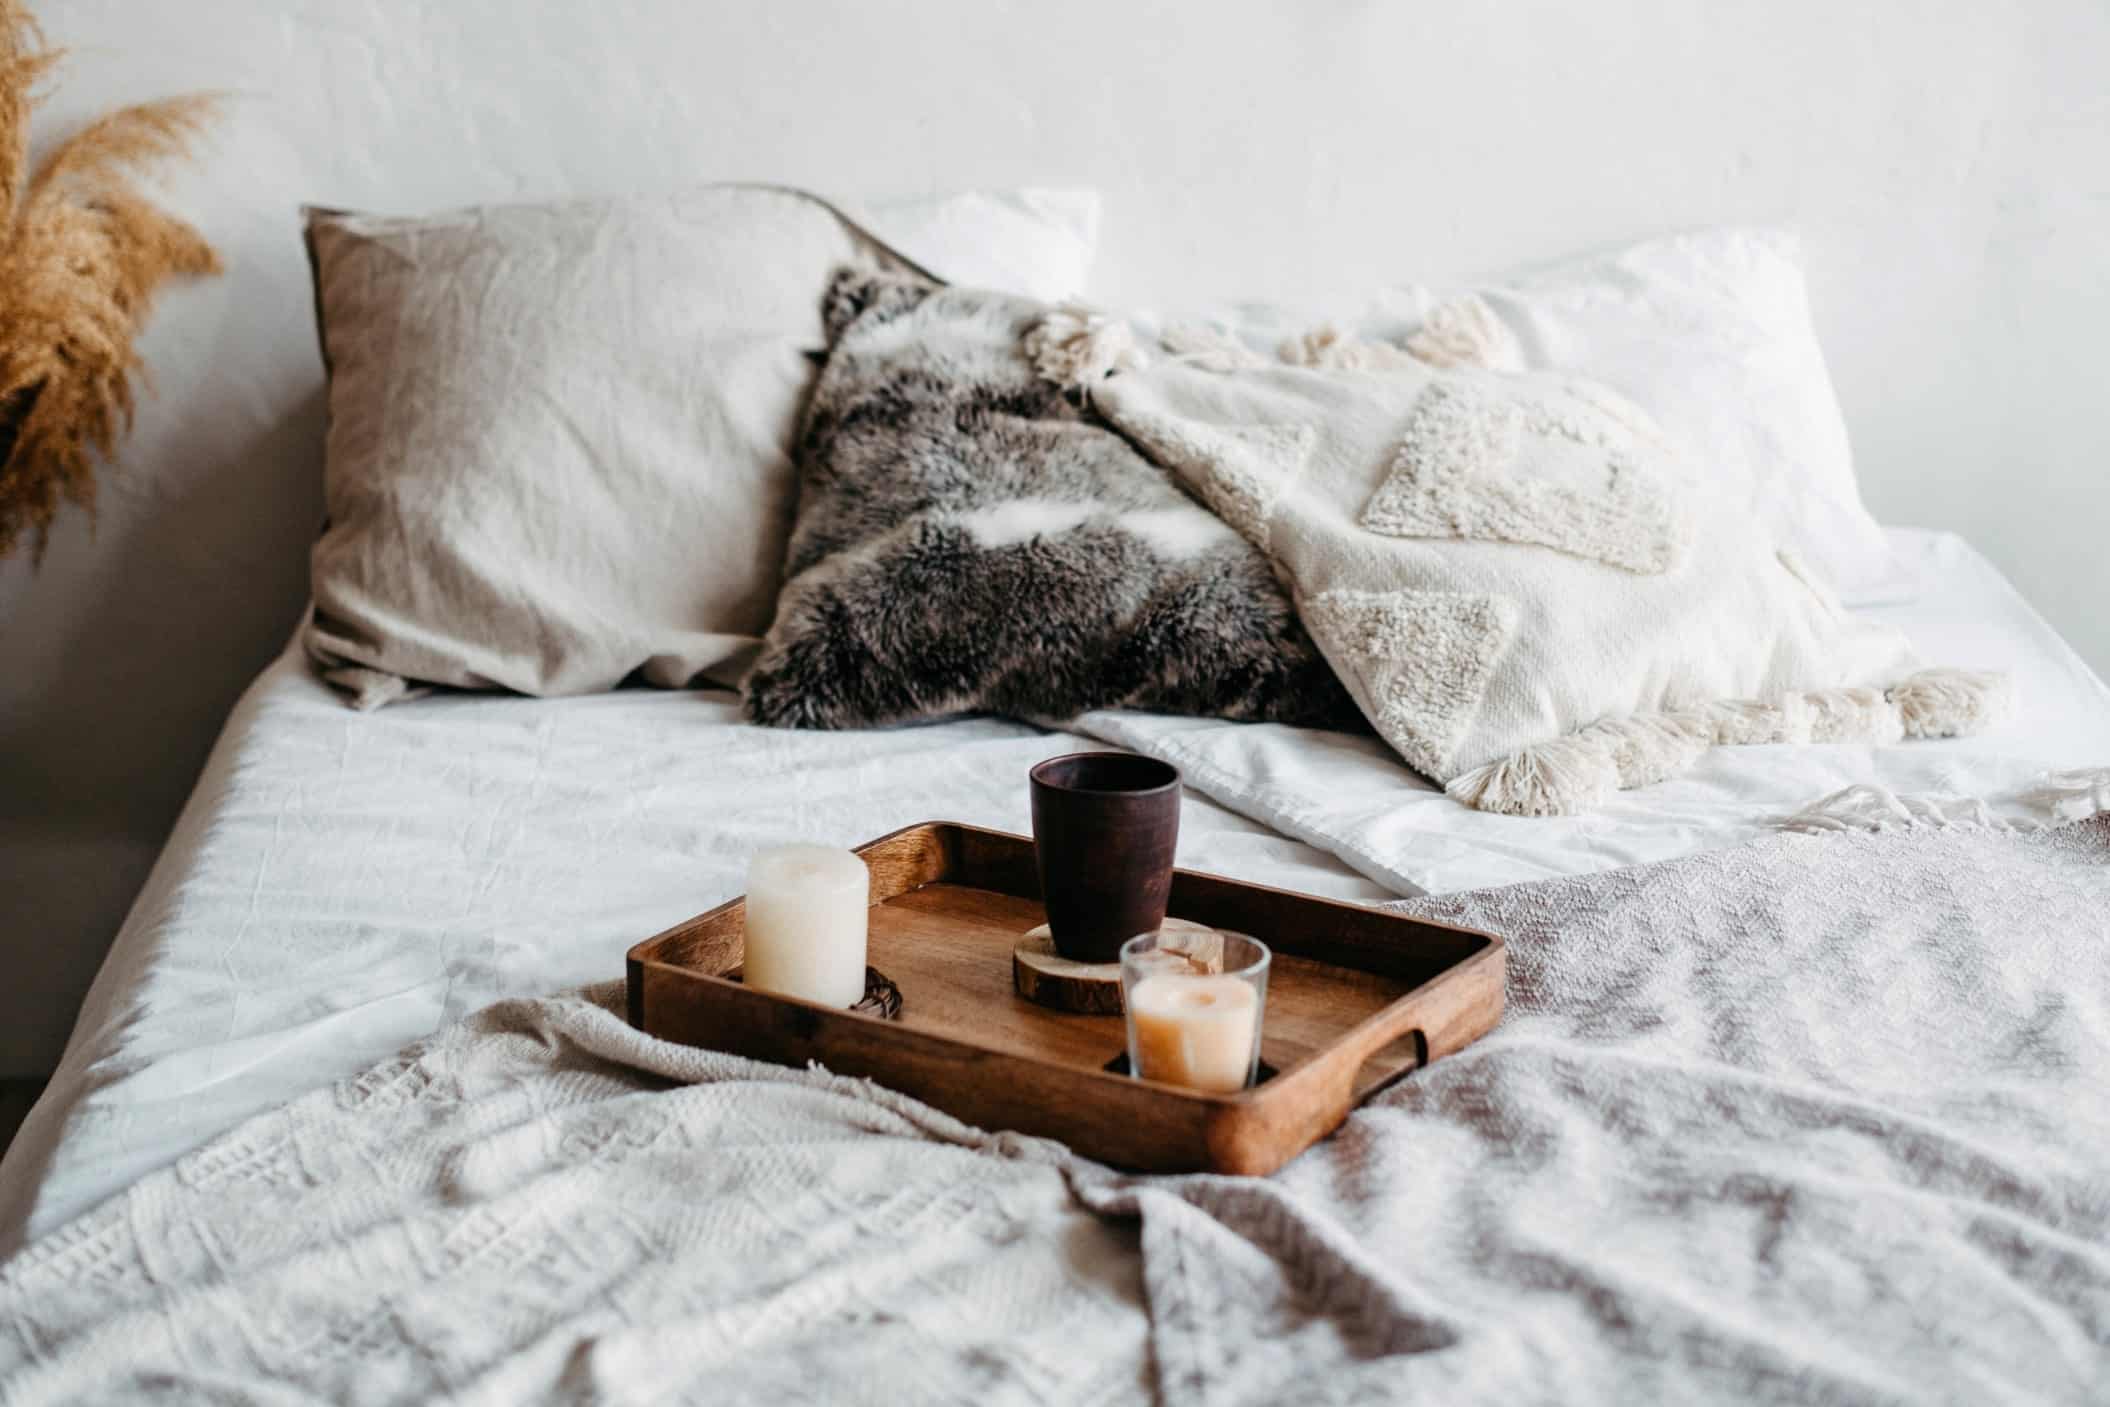 archway wooden tray with candles and a mug on the bed scandinavian interior the apartment is in neutral t20 xgx46b min